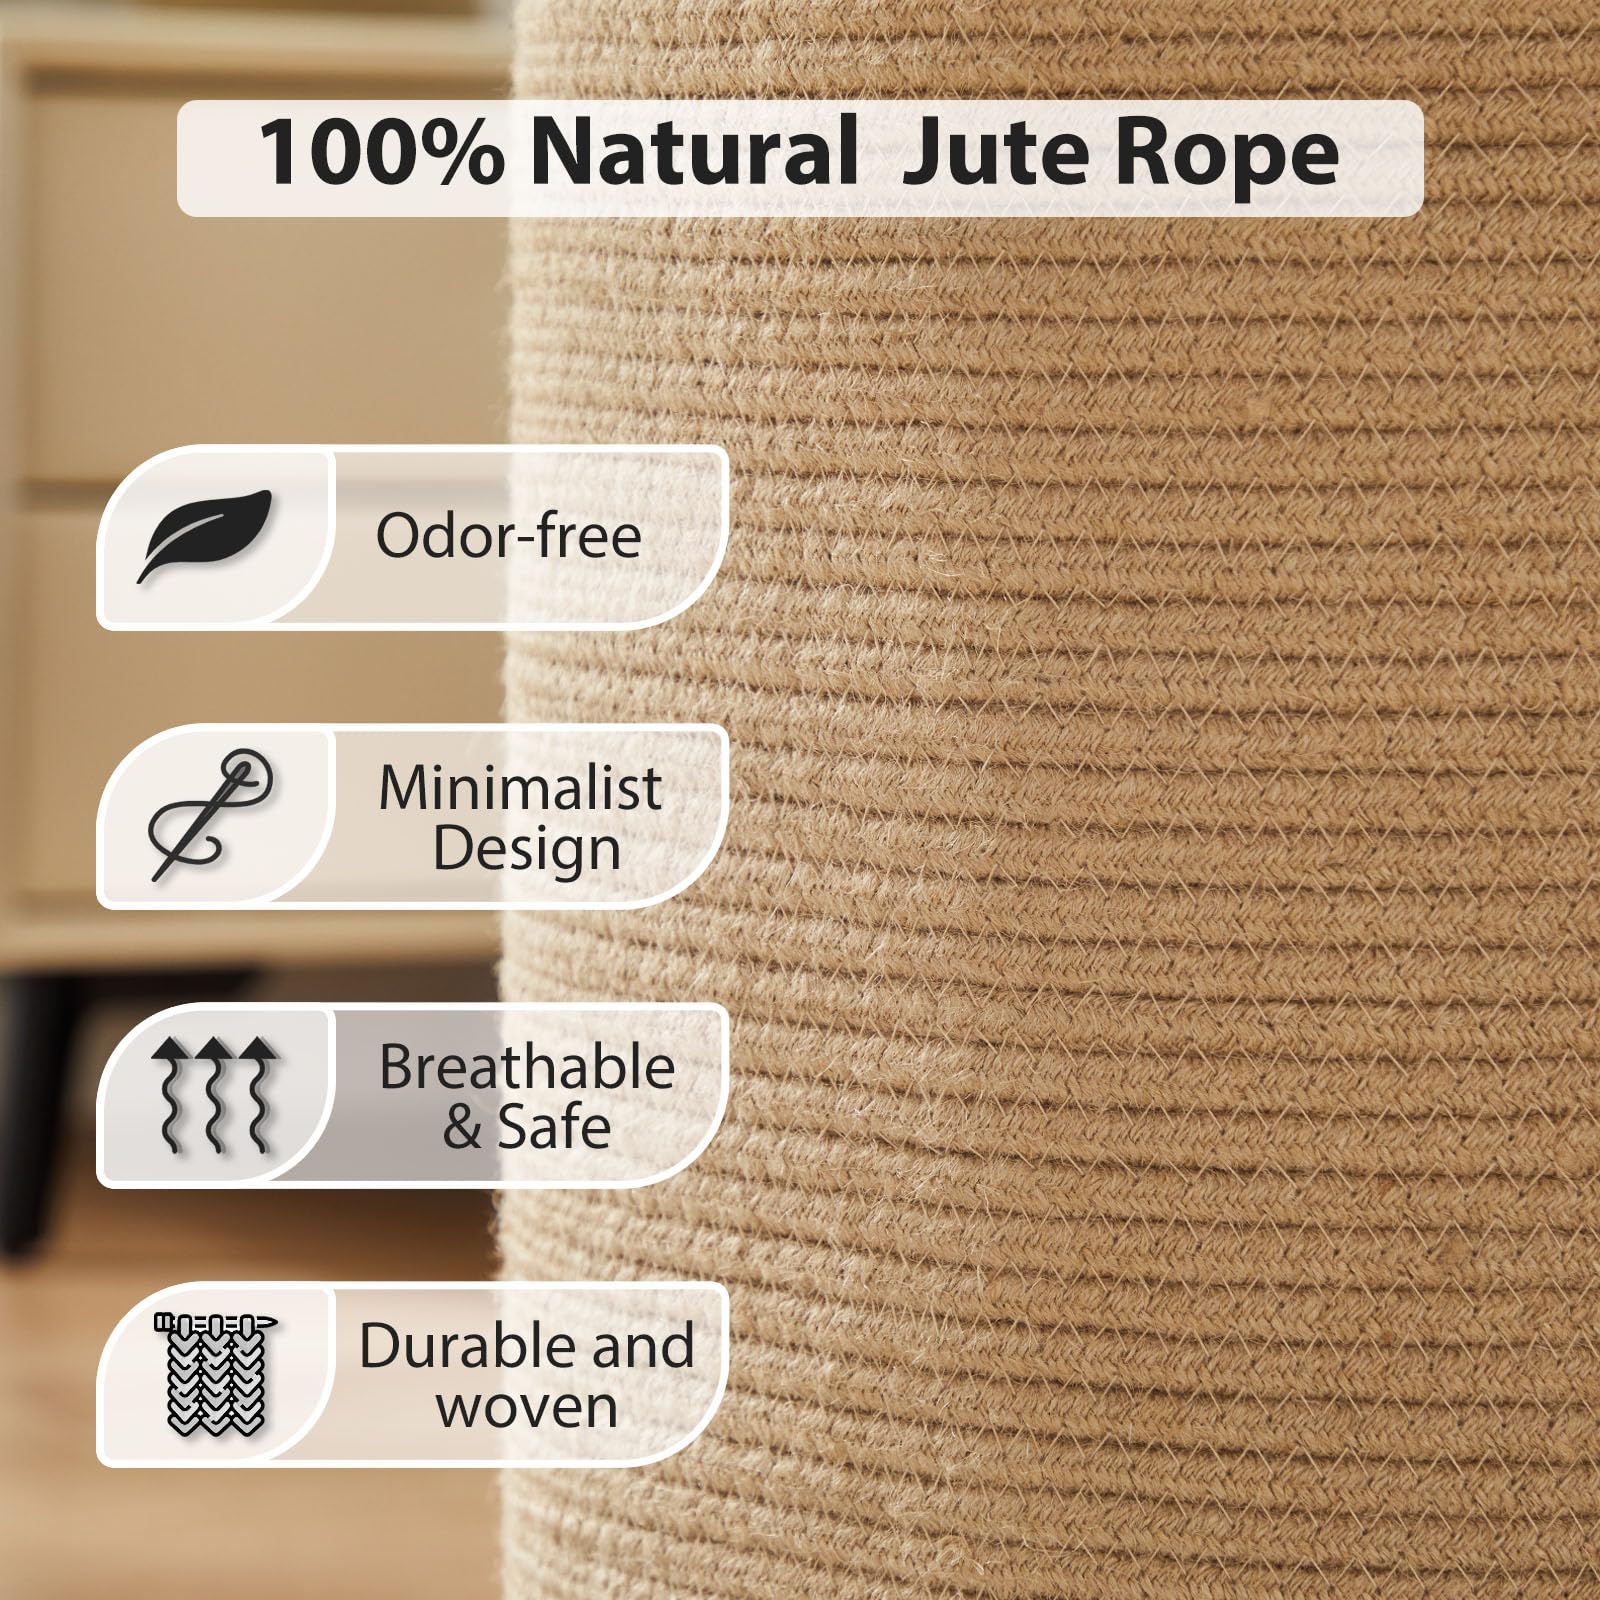 Jute Woven Rope Laundry Hamper, Tall Laundry Basket for Blanket Storage, Large Dirty Clothes Hamper for Toys, Decorative Baby Nursery Hamper for Bedroom, Living Room - Jute Brown, 72L